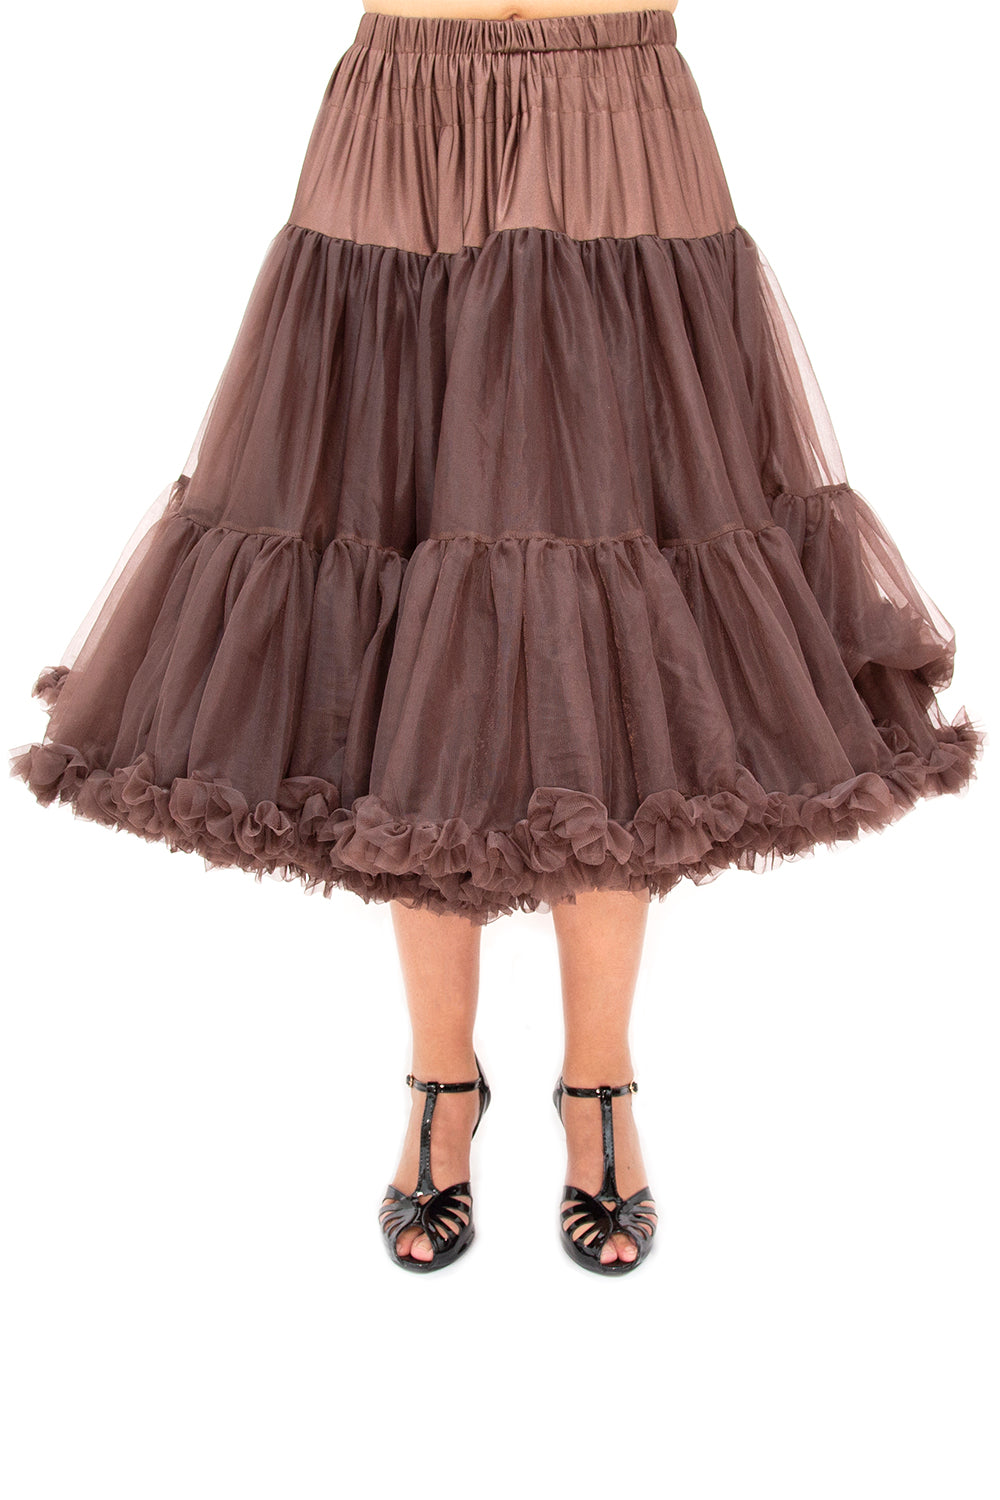 Dancing Days Lifeforms 50s Style 25"-27" Long Petticoat In Brown